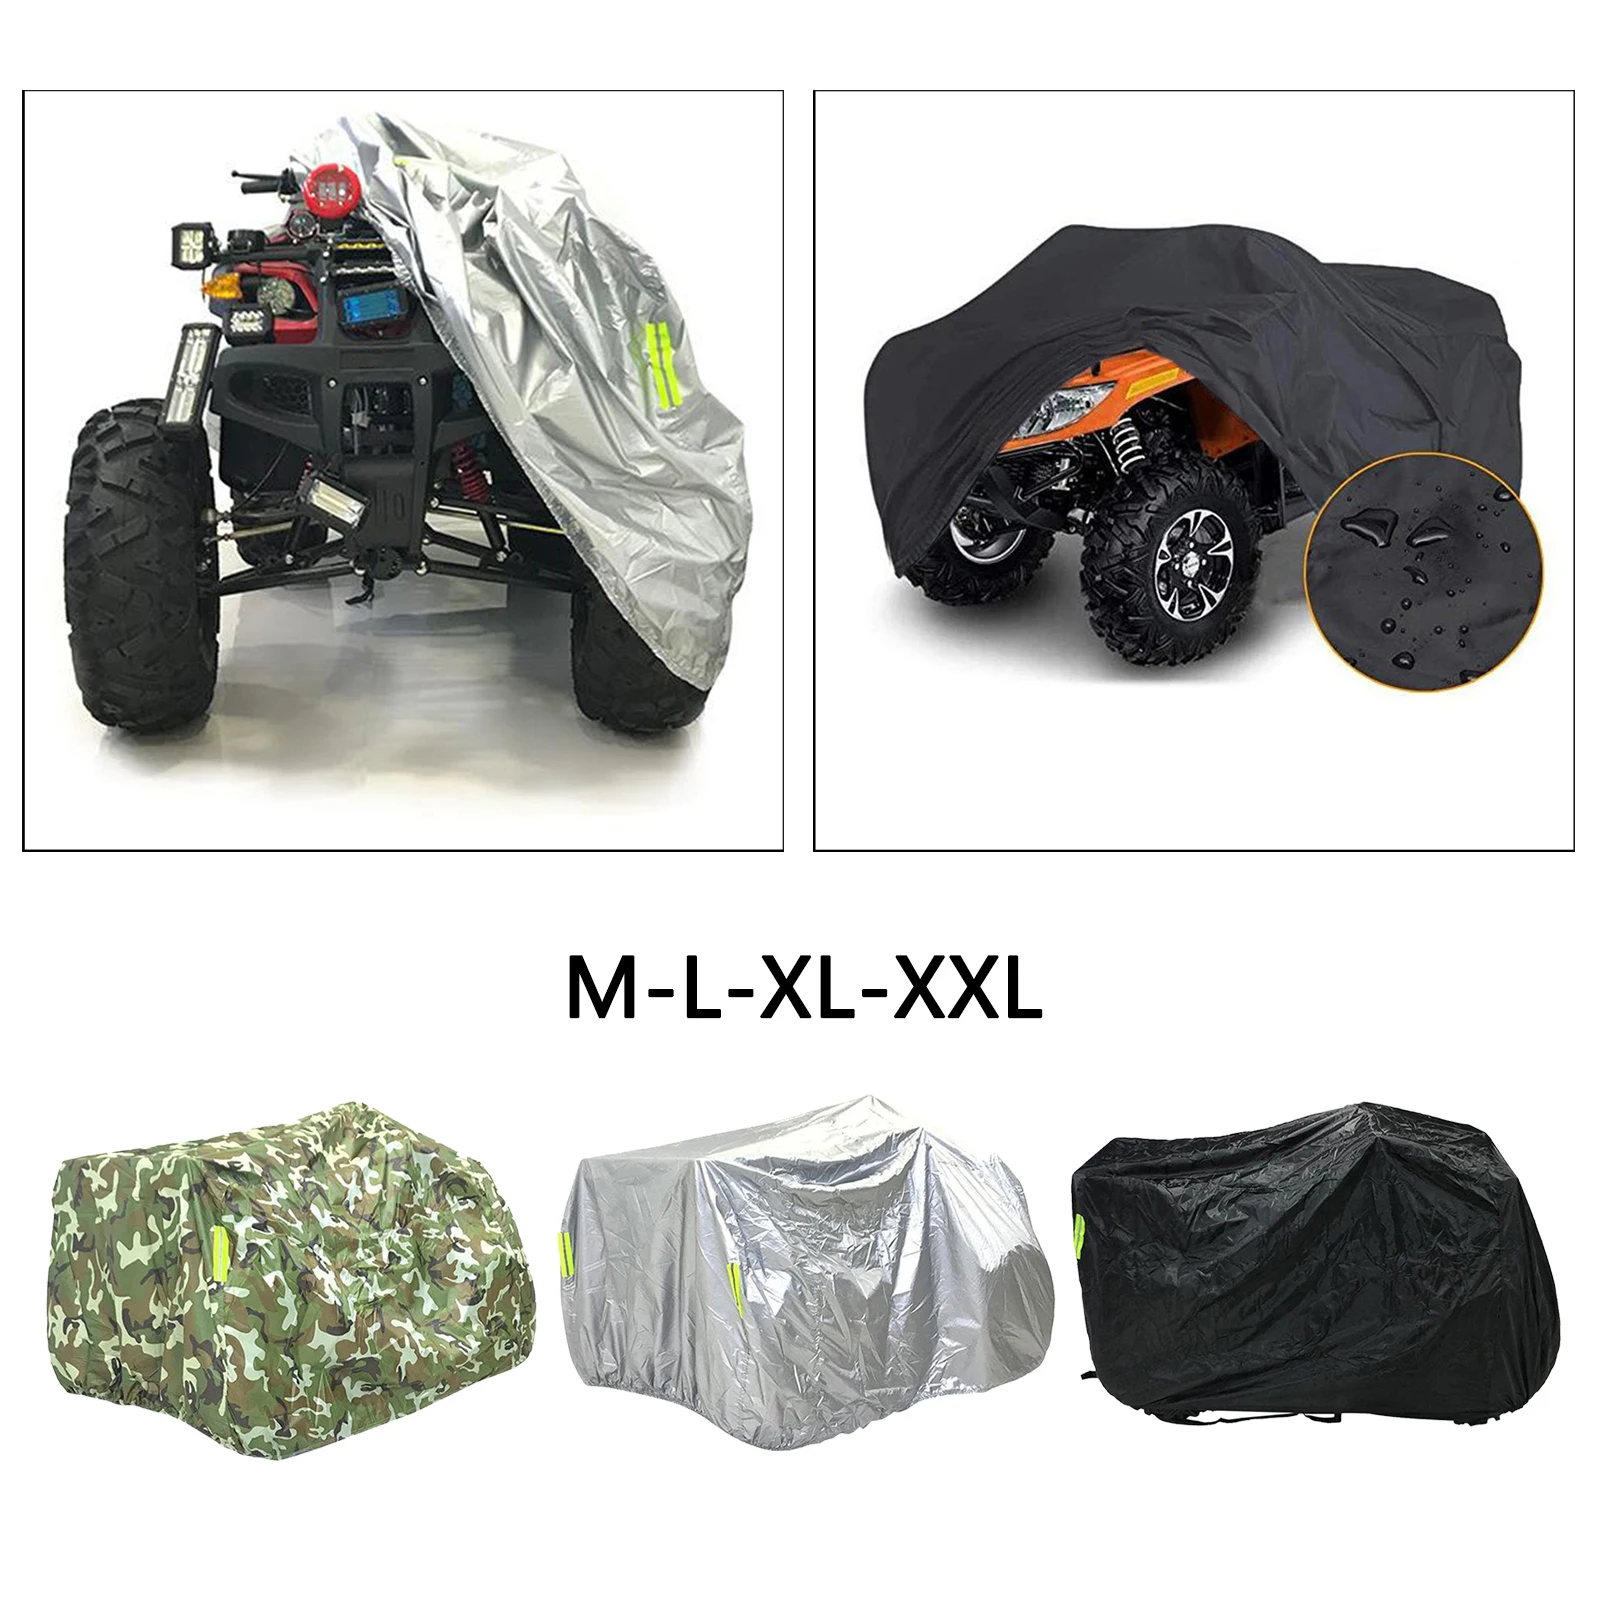 Lockholes Professional 4 Wheeler Quad Cover for Protects ATV from Dust Wind